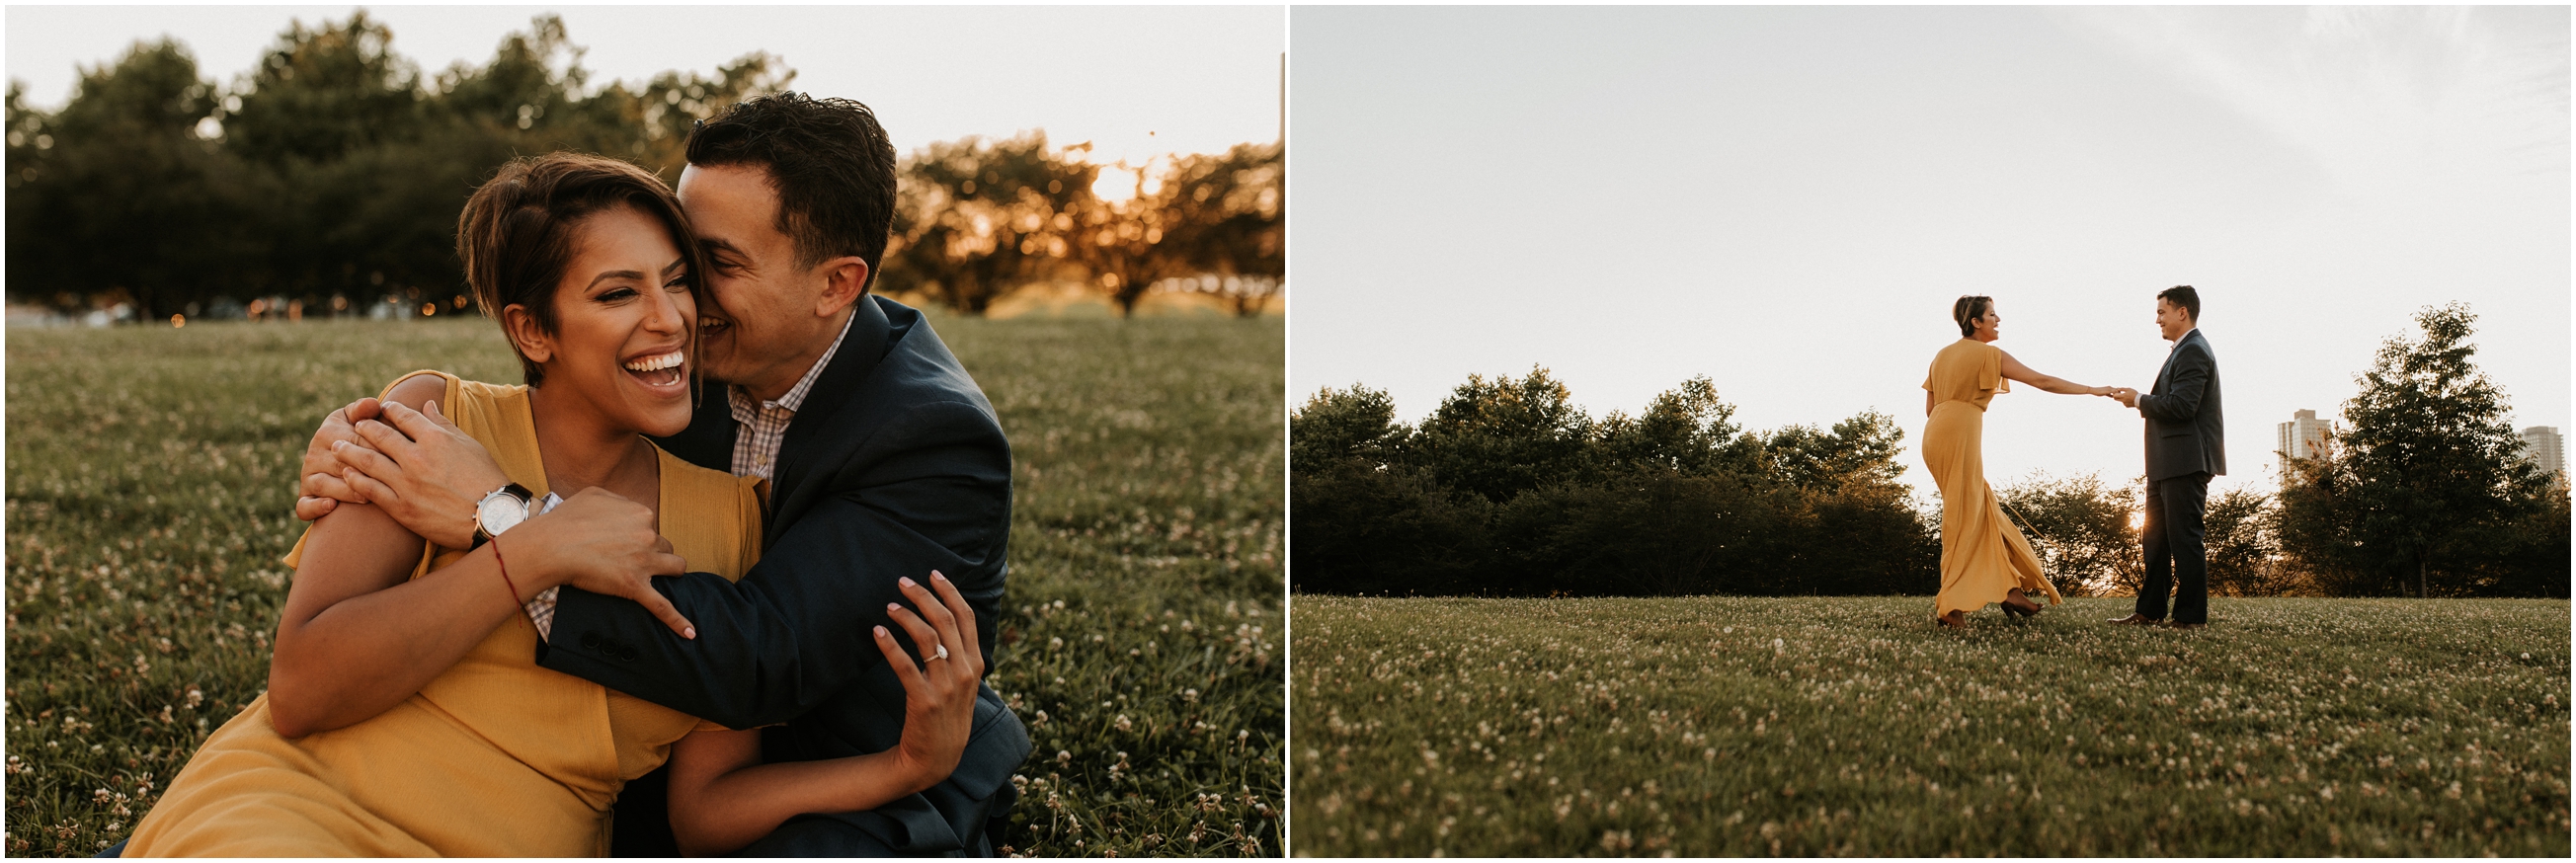 couple engagement session libery state park jersey city